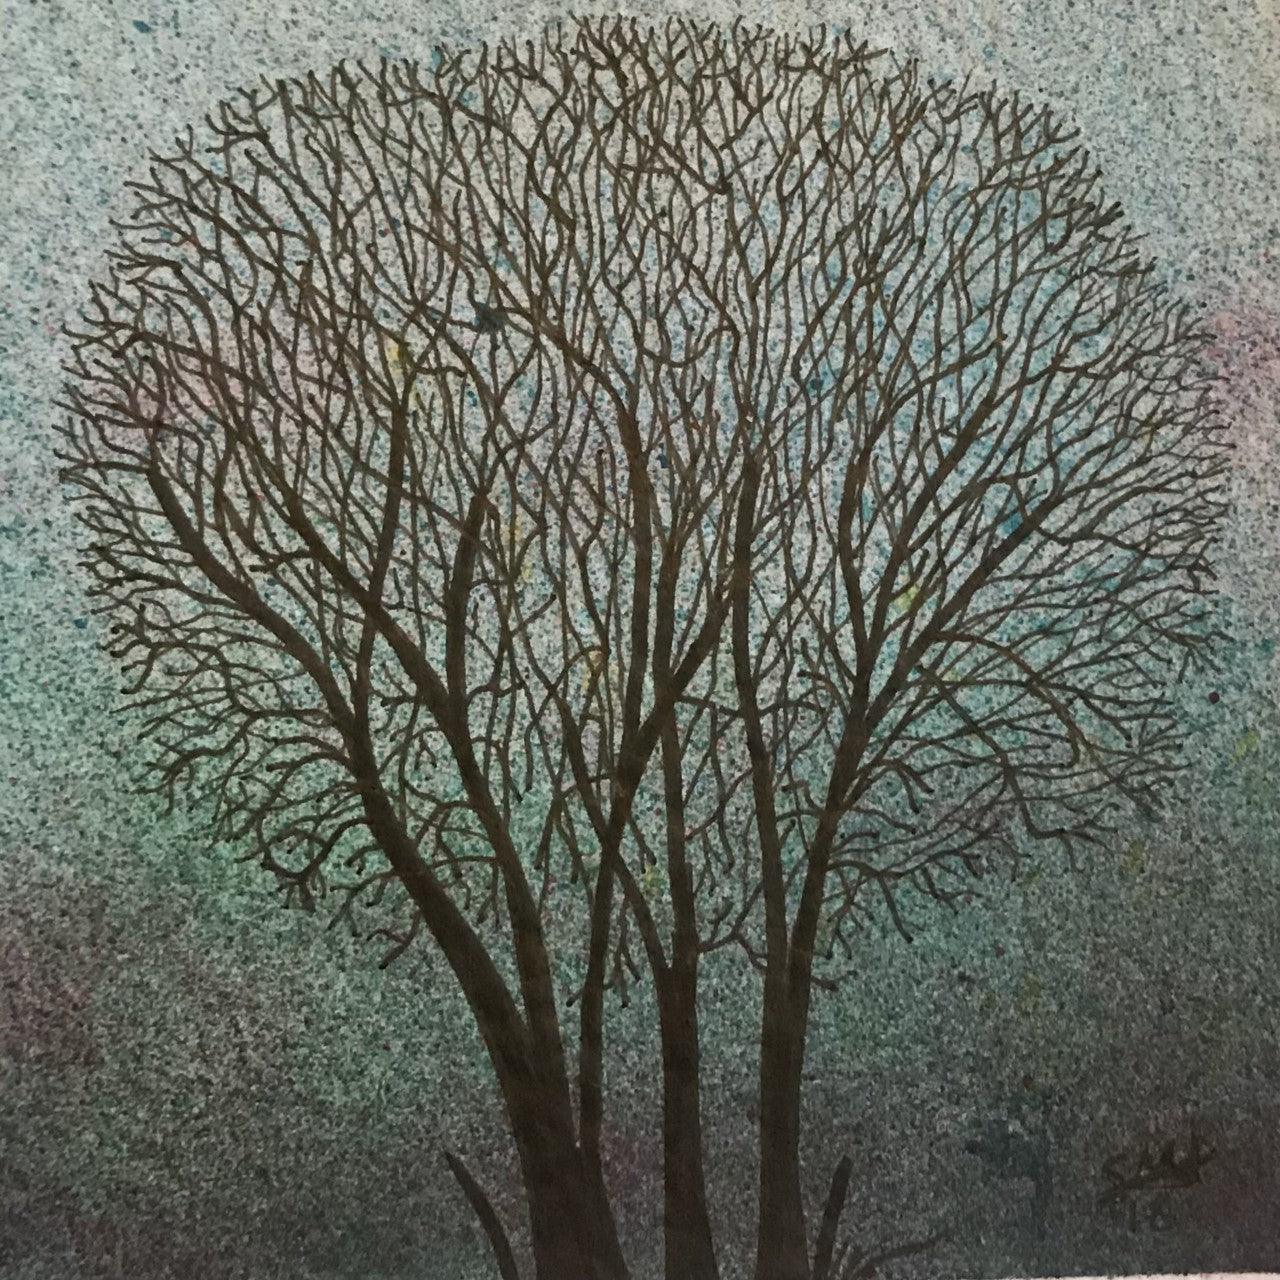 Winter Trees at Dusk - Gigglewick Gallery